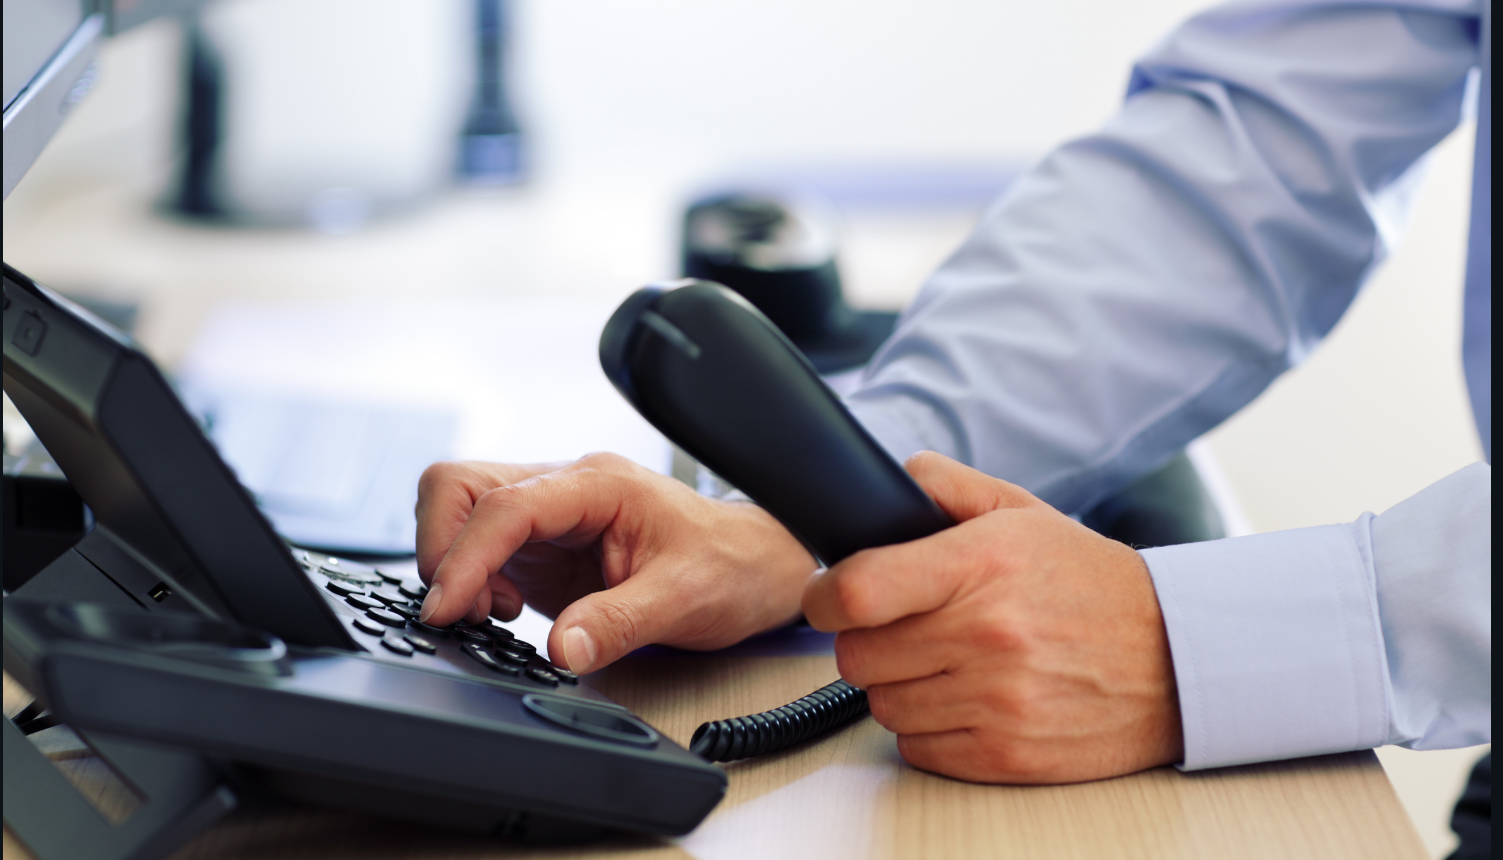 The image is of a man’s hands on a phone that is sitting on a desk. He is wearing long sleeves. One of his hands is dialing the phone and the other is holding the receiver. The image accompanies an article about why insurance companies conduct phone interviews.